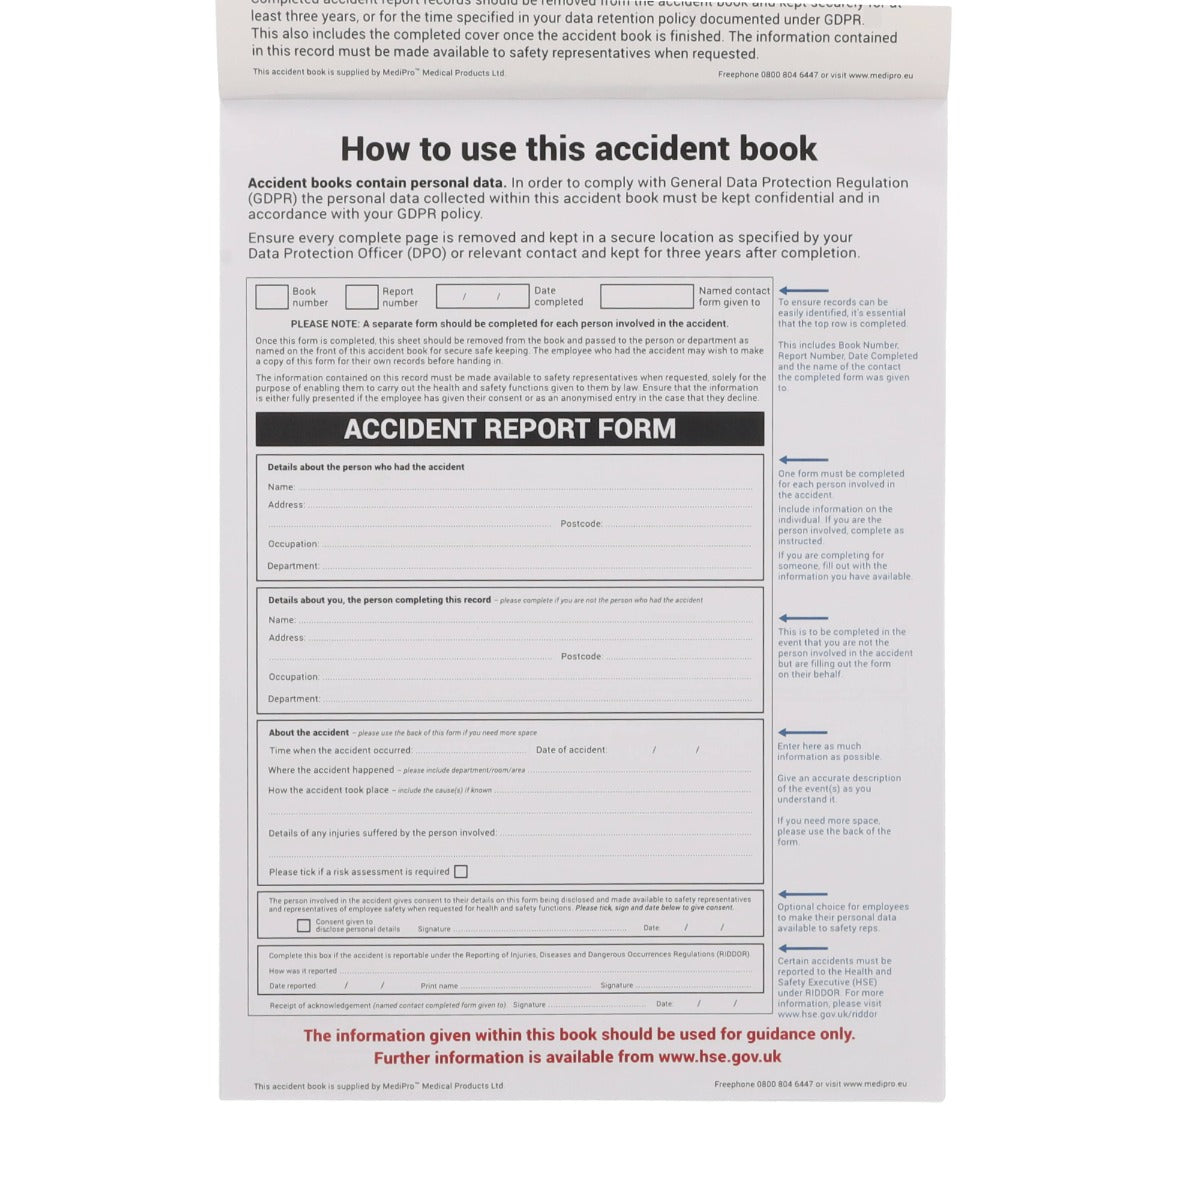 A5 Accident Book - GDPR Compliant - Medipro